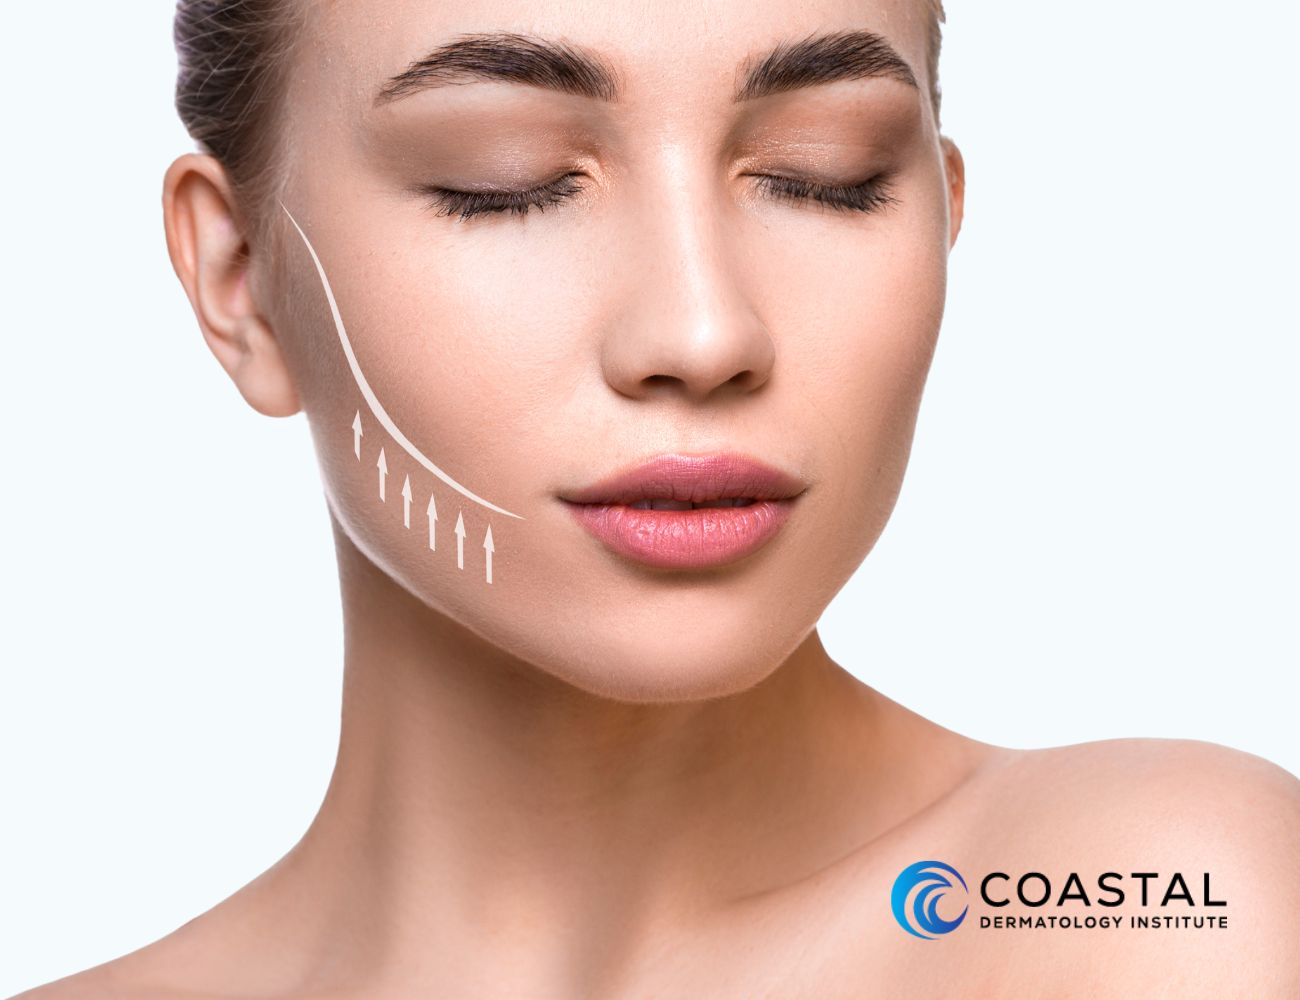 Emface: The Ultimate Non-Surgical Facial Lifting Treatment